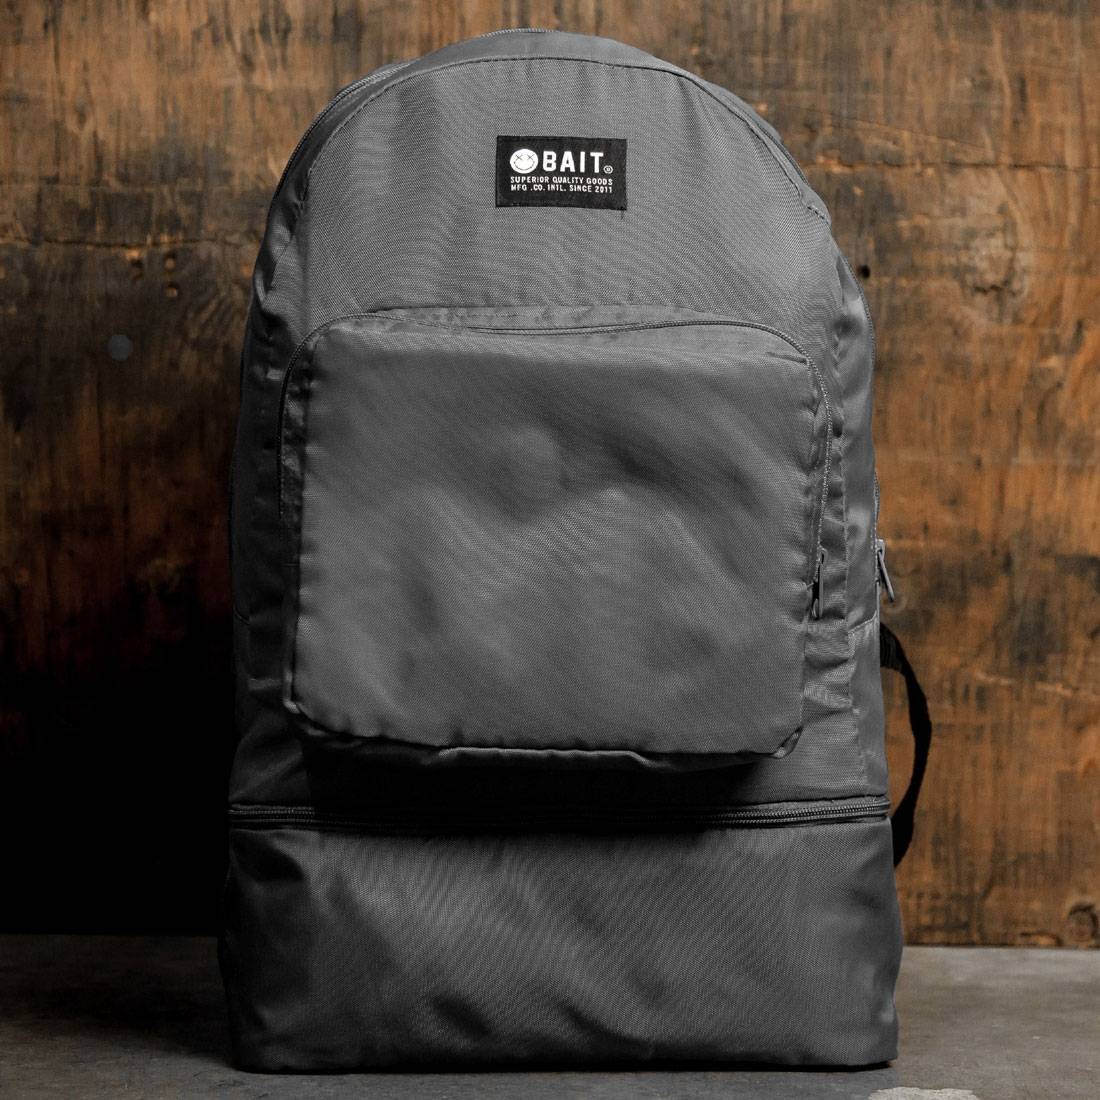 BAIT Lightweight Packable And Detachable Sneaker Nylon Backpack (gray / iron gray)